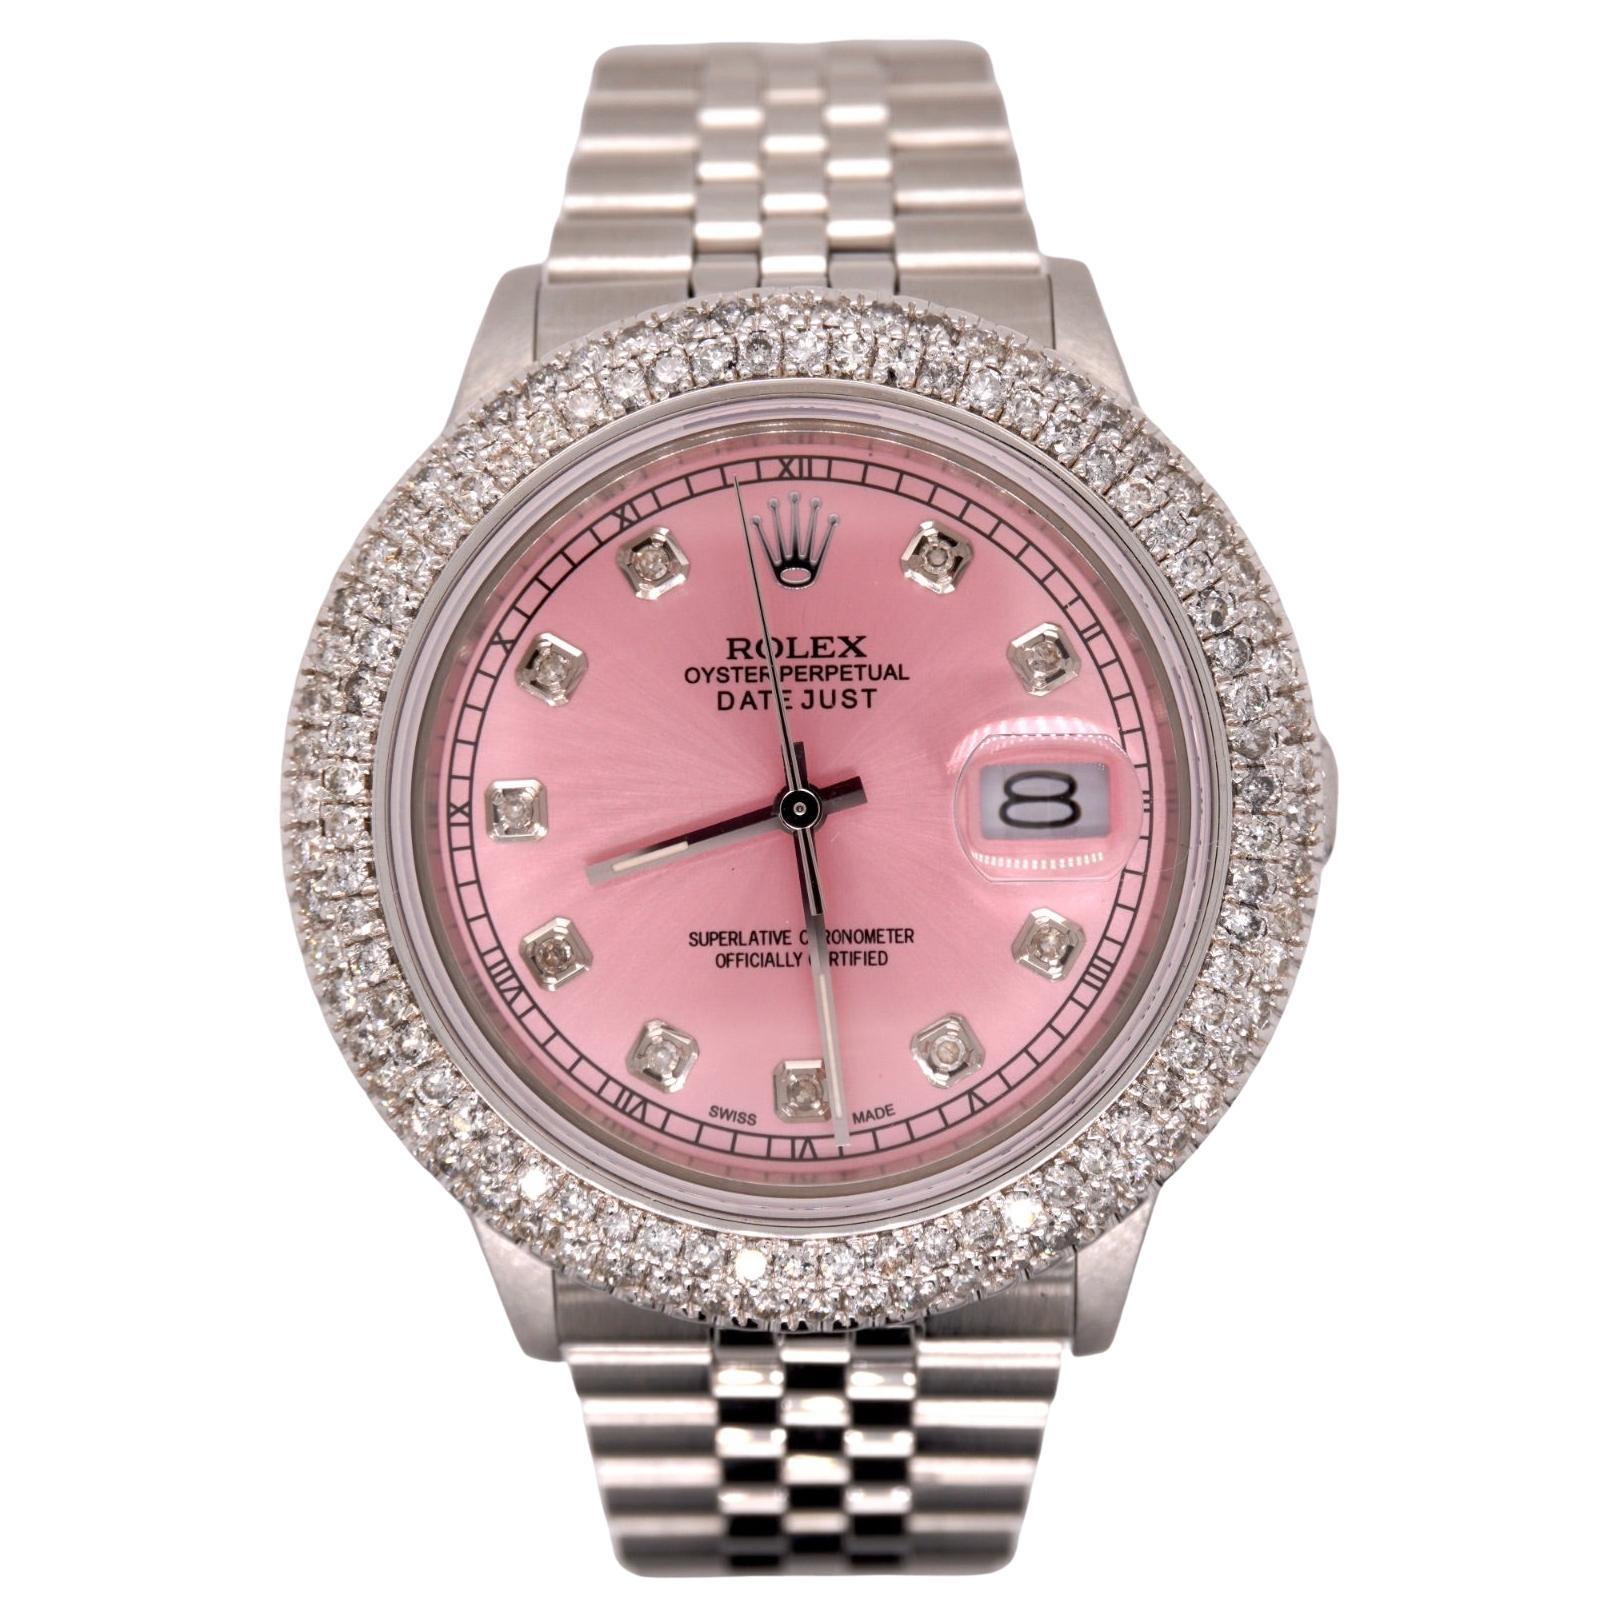 Rolex Datejust 36mm Jubilee Steel Watch ICED 3.50ct Diamonds Pink Dial 16014 For Sale